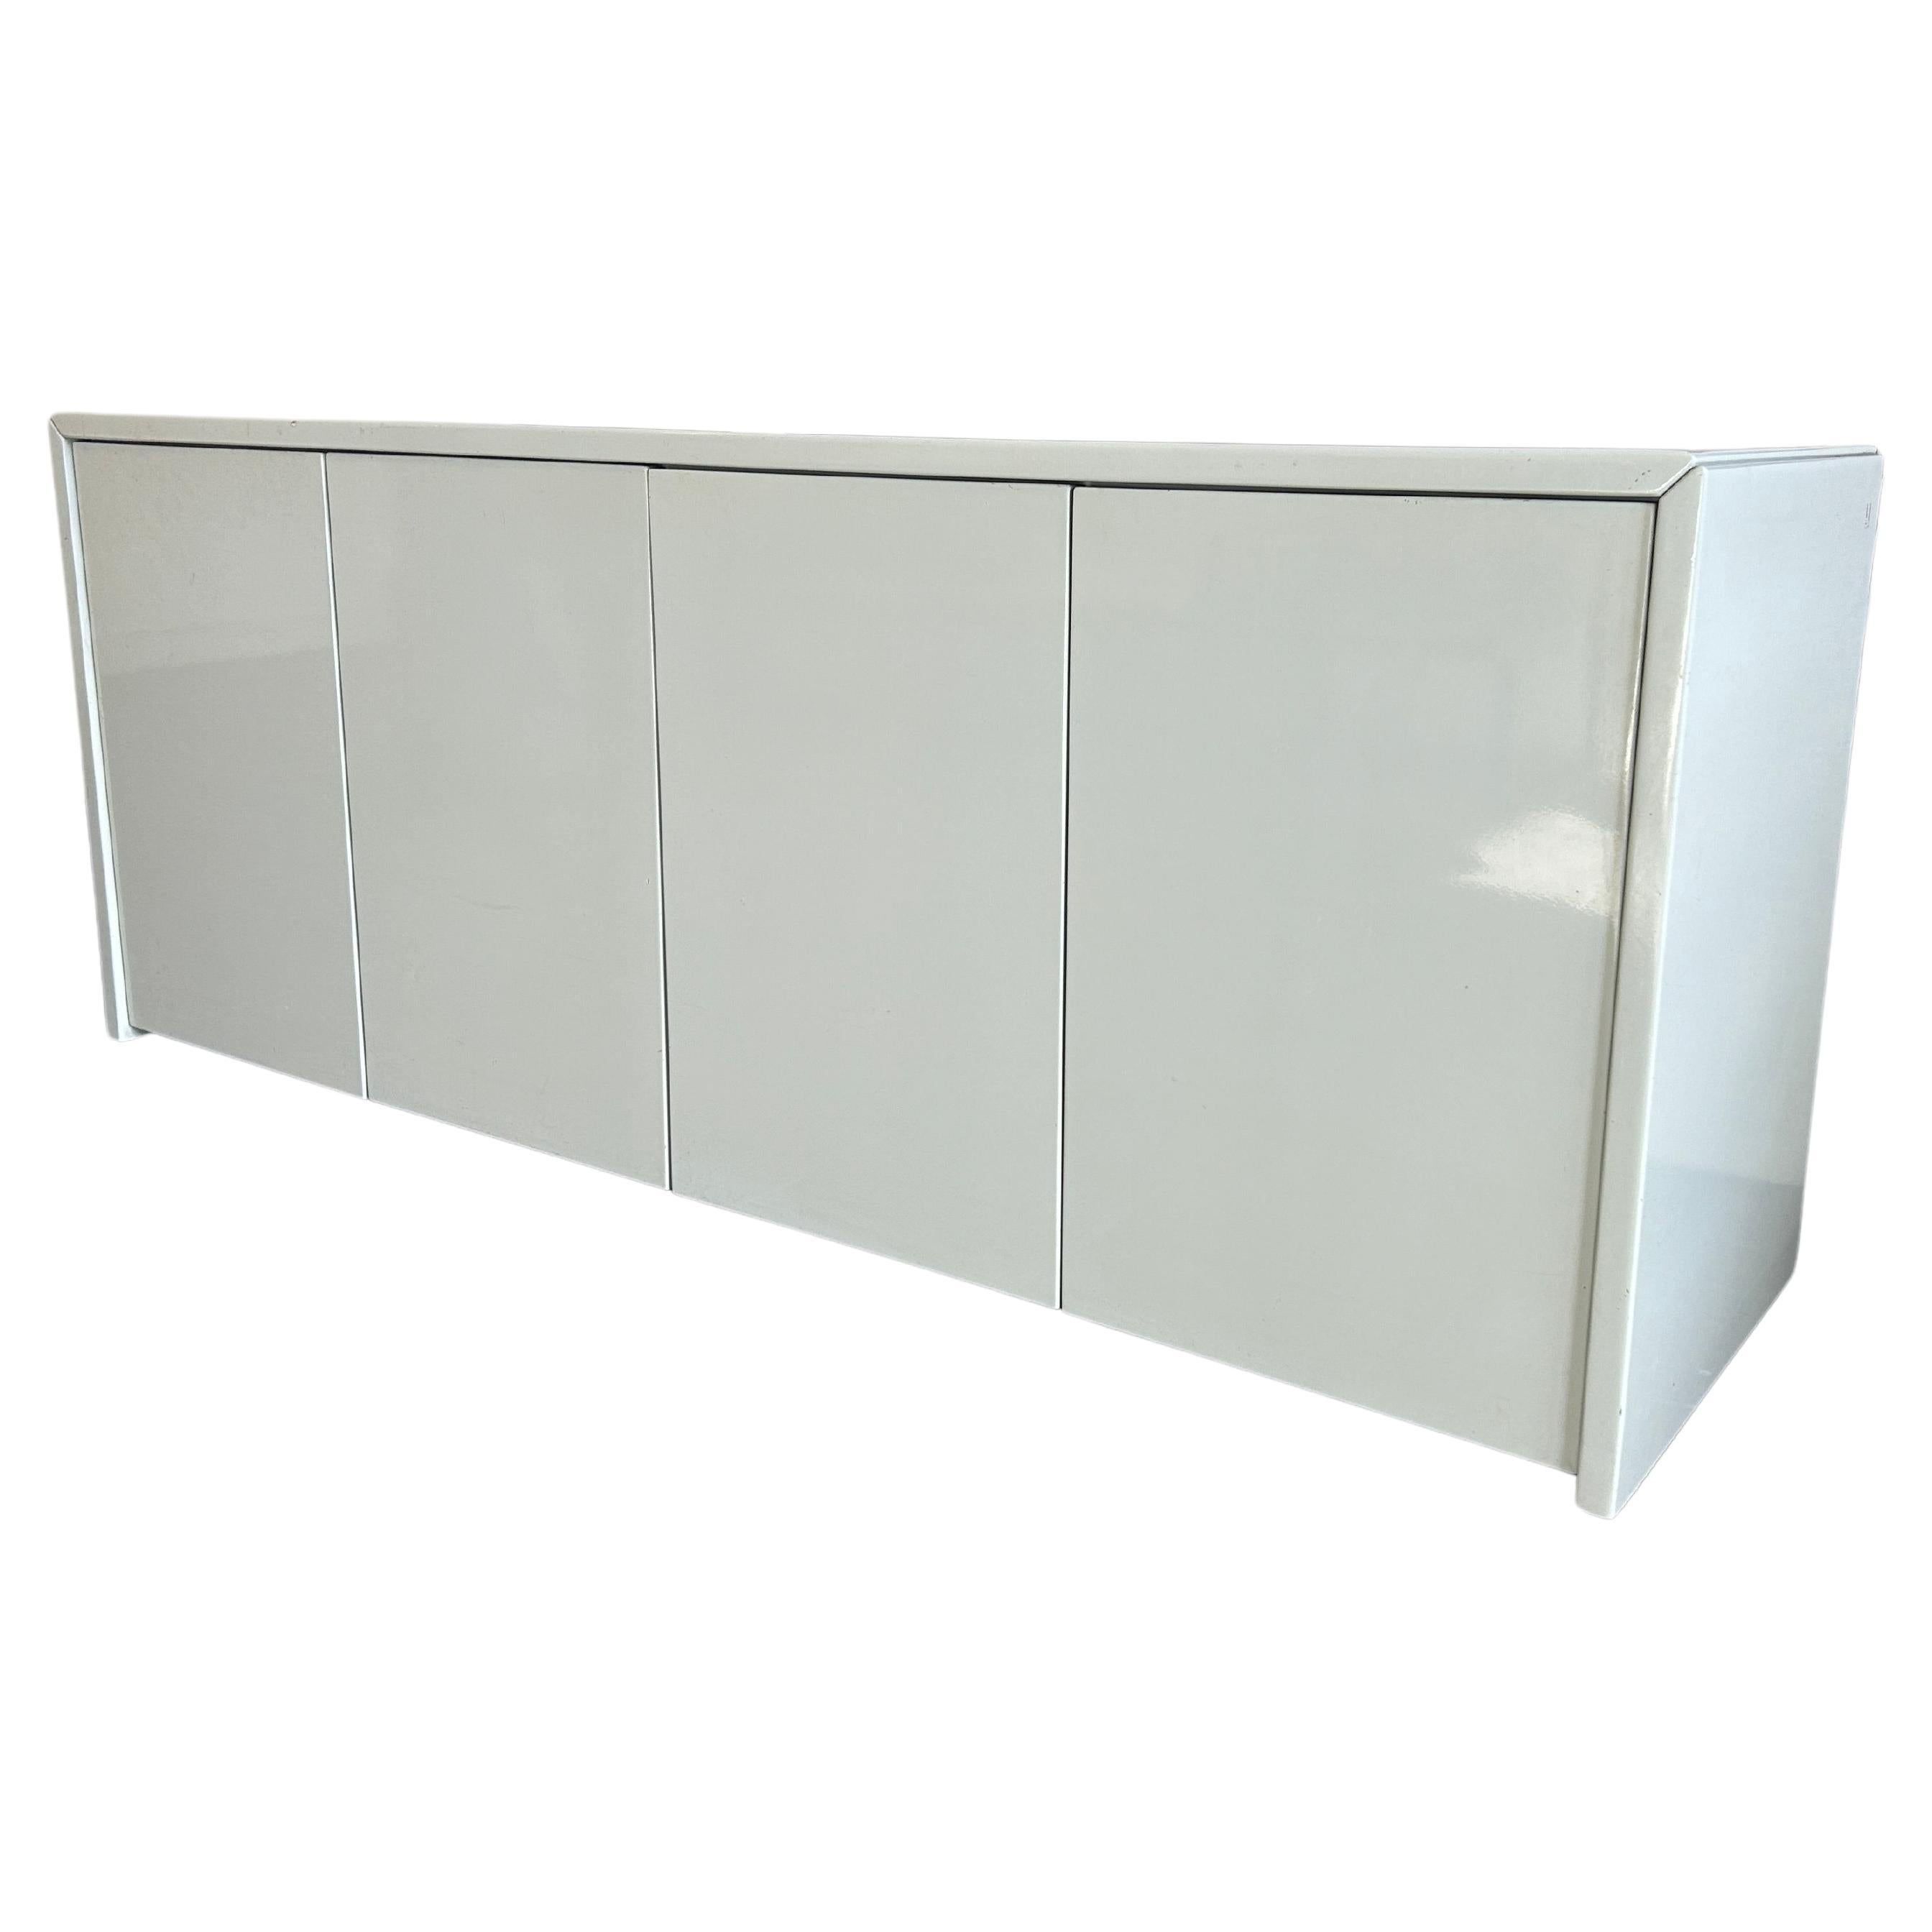 Post modern light gray gloss lacquer 4 door credenza Cabinet For Sale